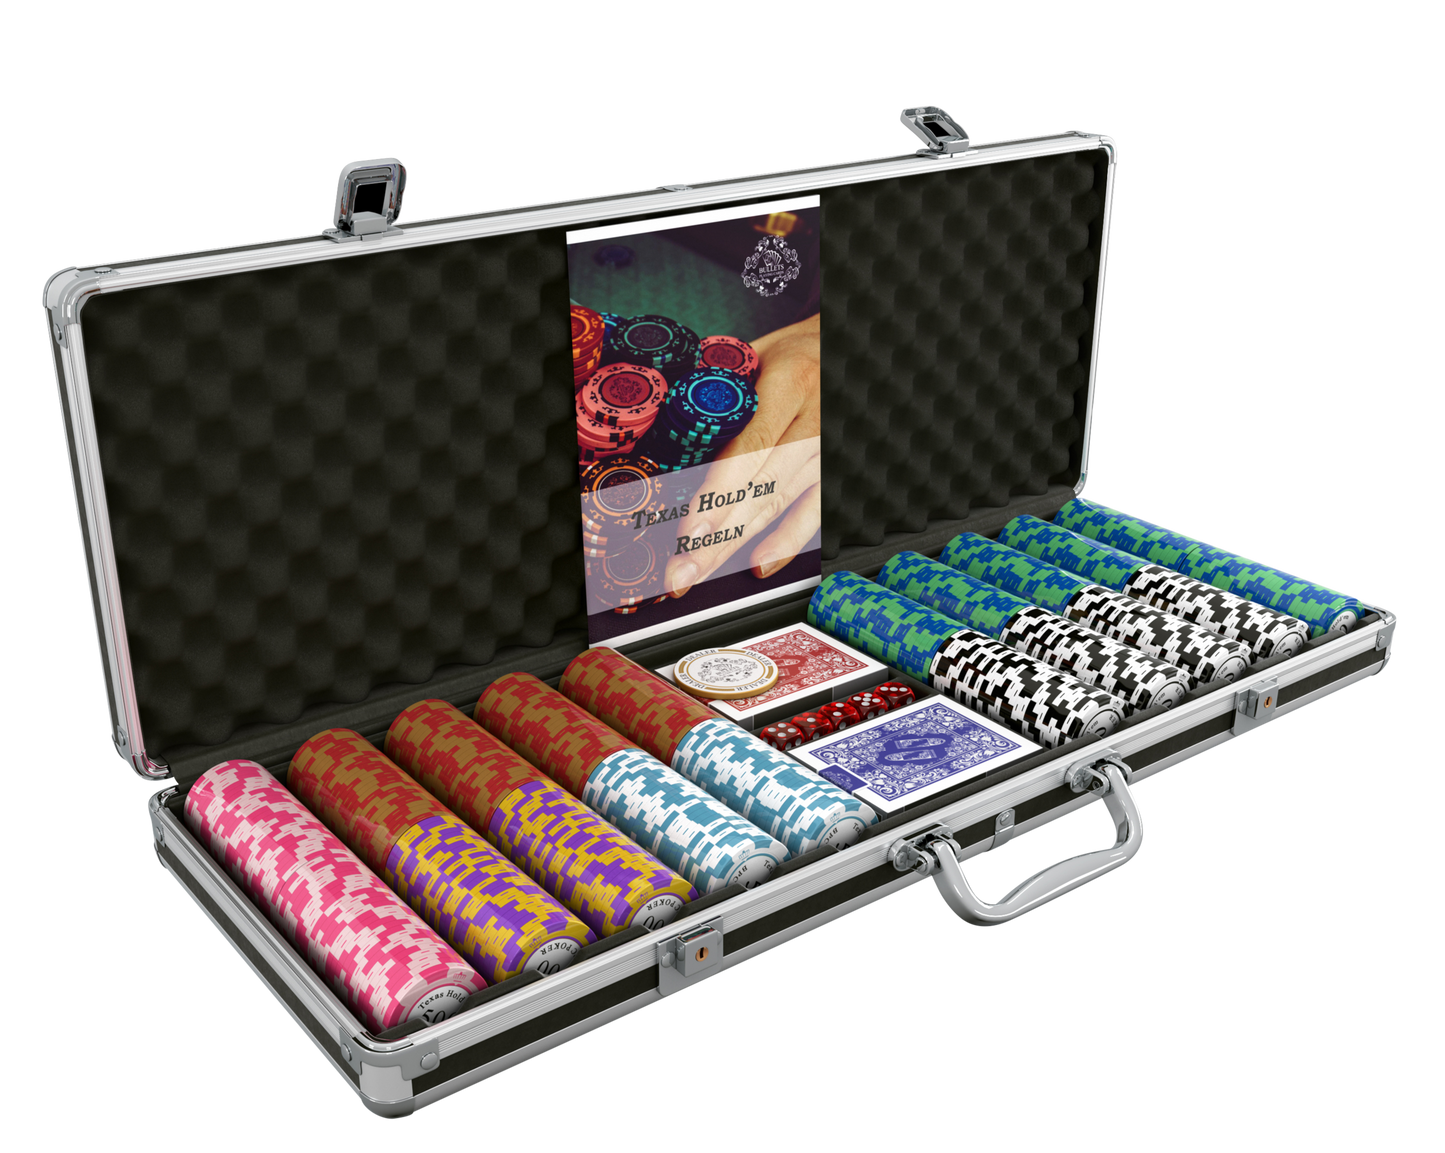 Poker case with 500 clay poker chips "Carmela" with values